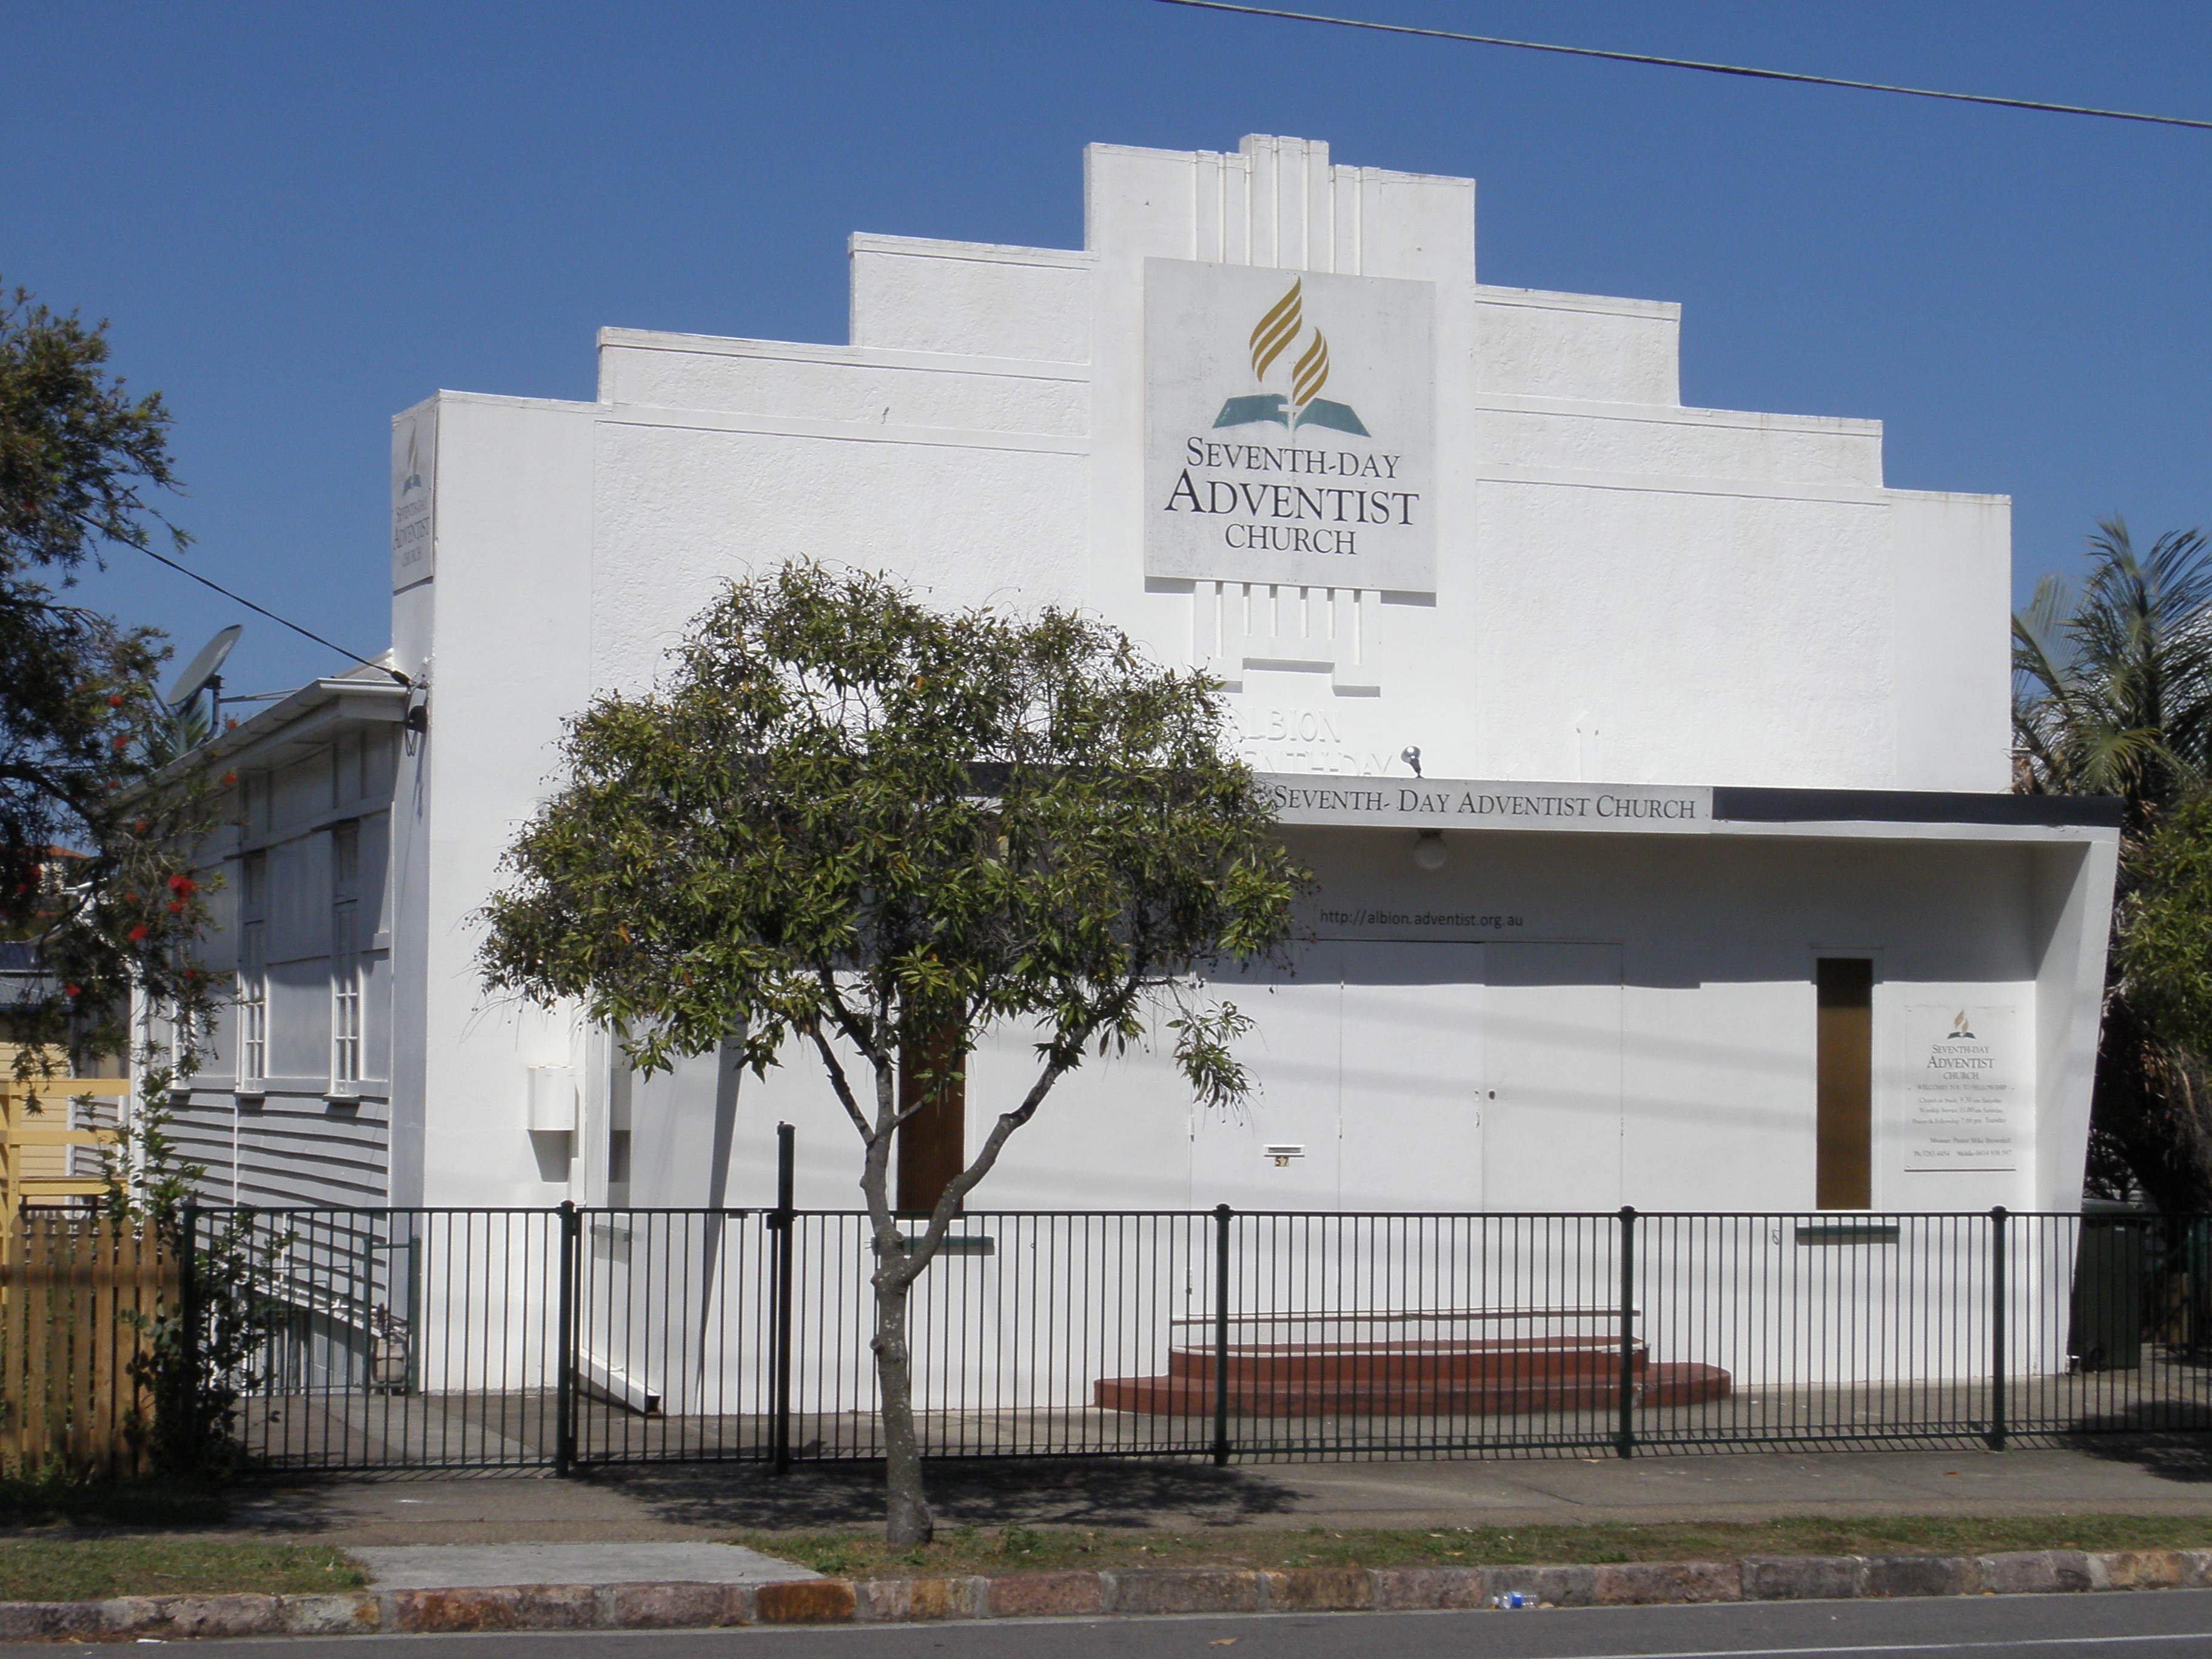 This is an image of the Heritage Place known as the Albion Seventh Day Adventist Church located on 57 McLennan Street in Albion